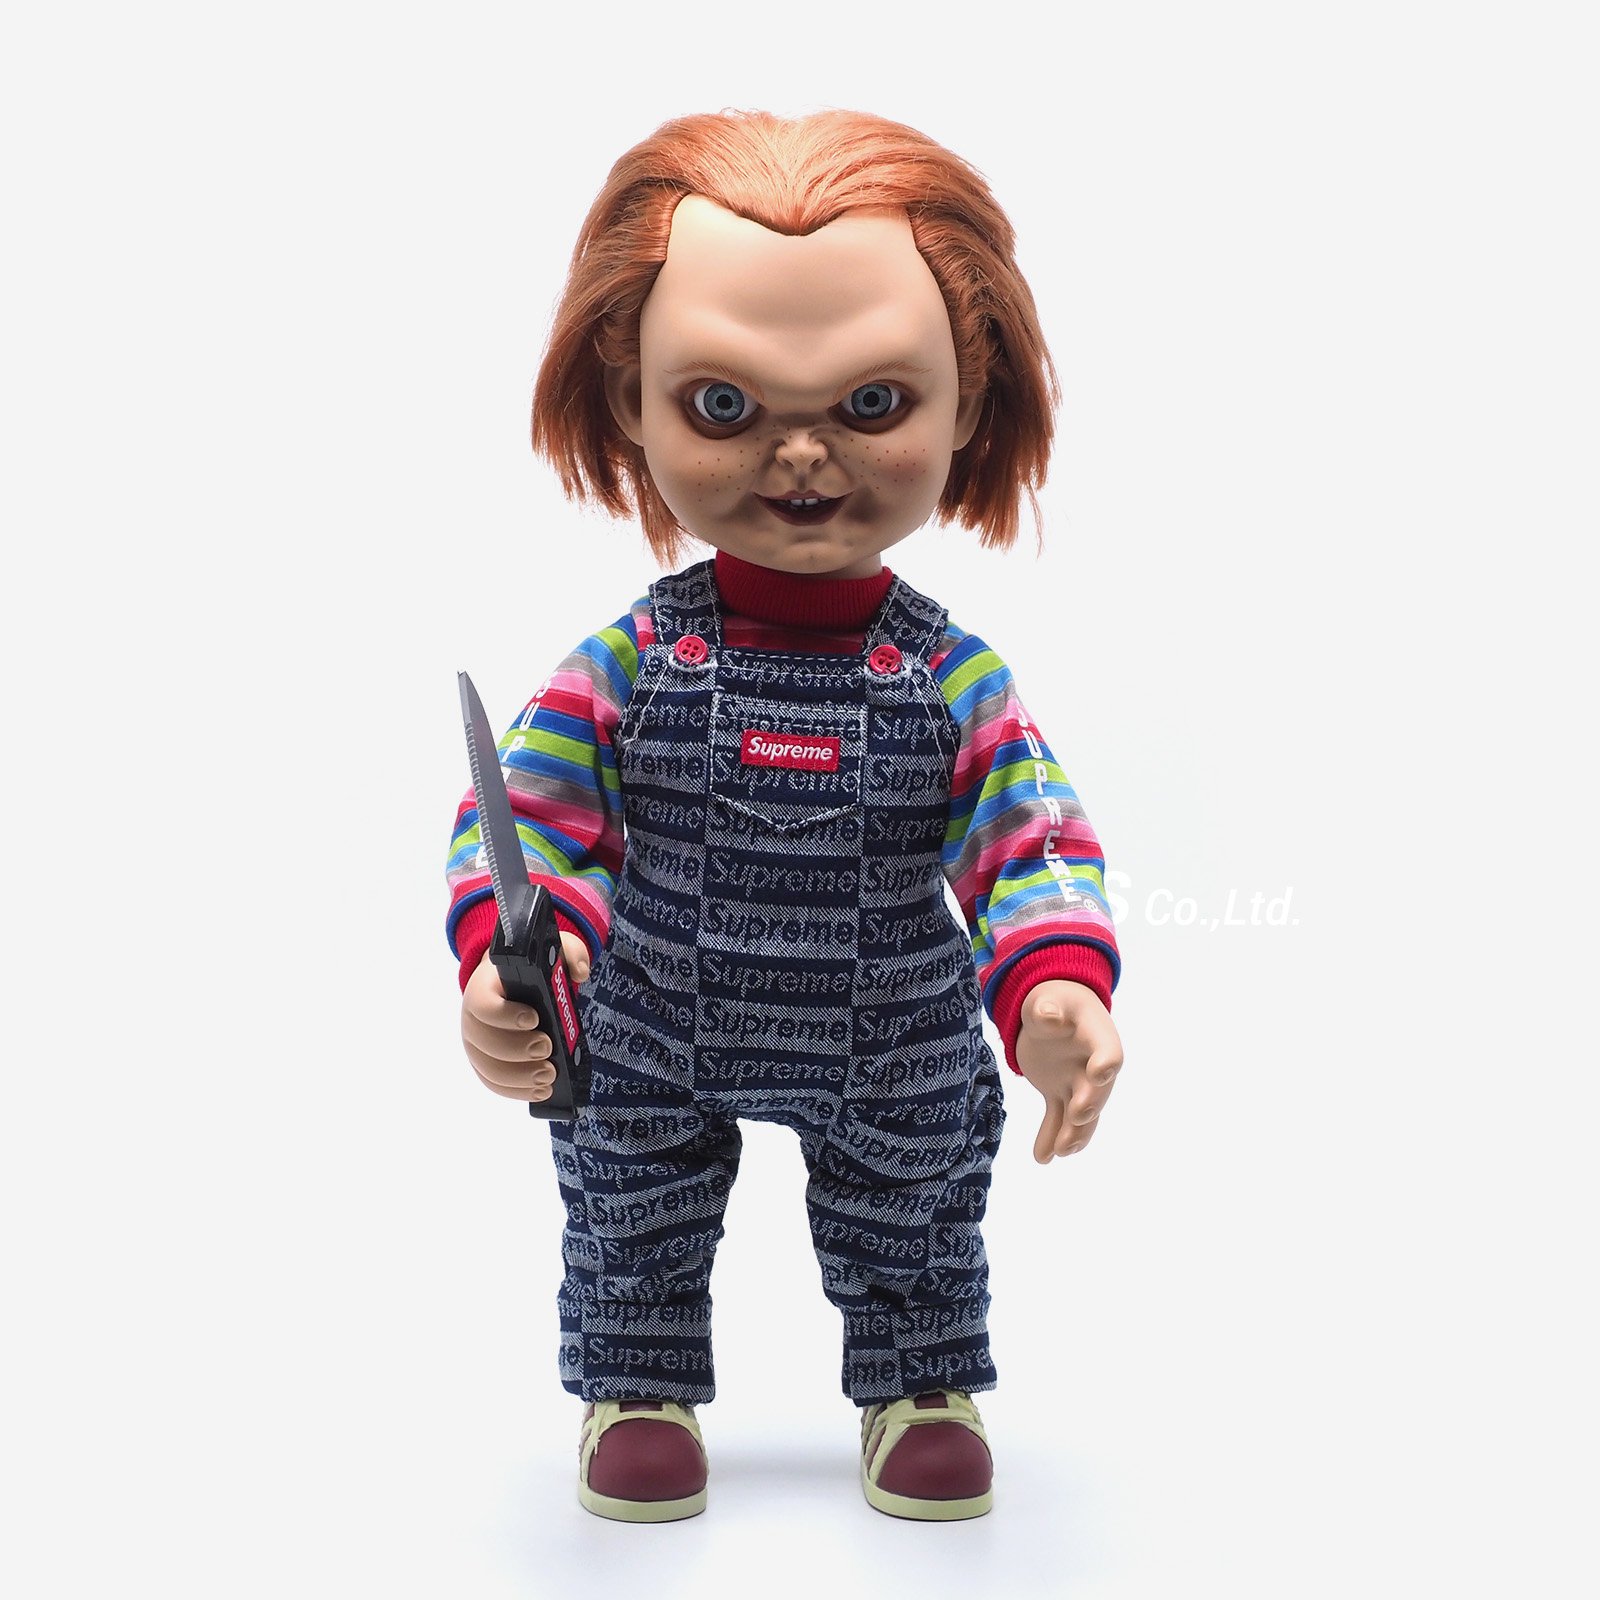 Supreme Chucky Doll Child's Play